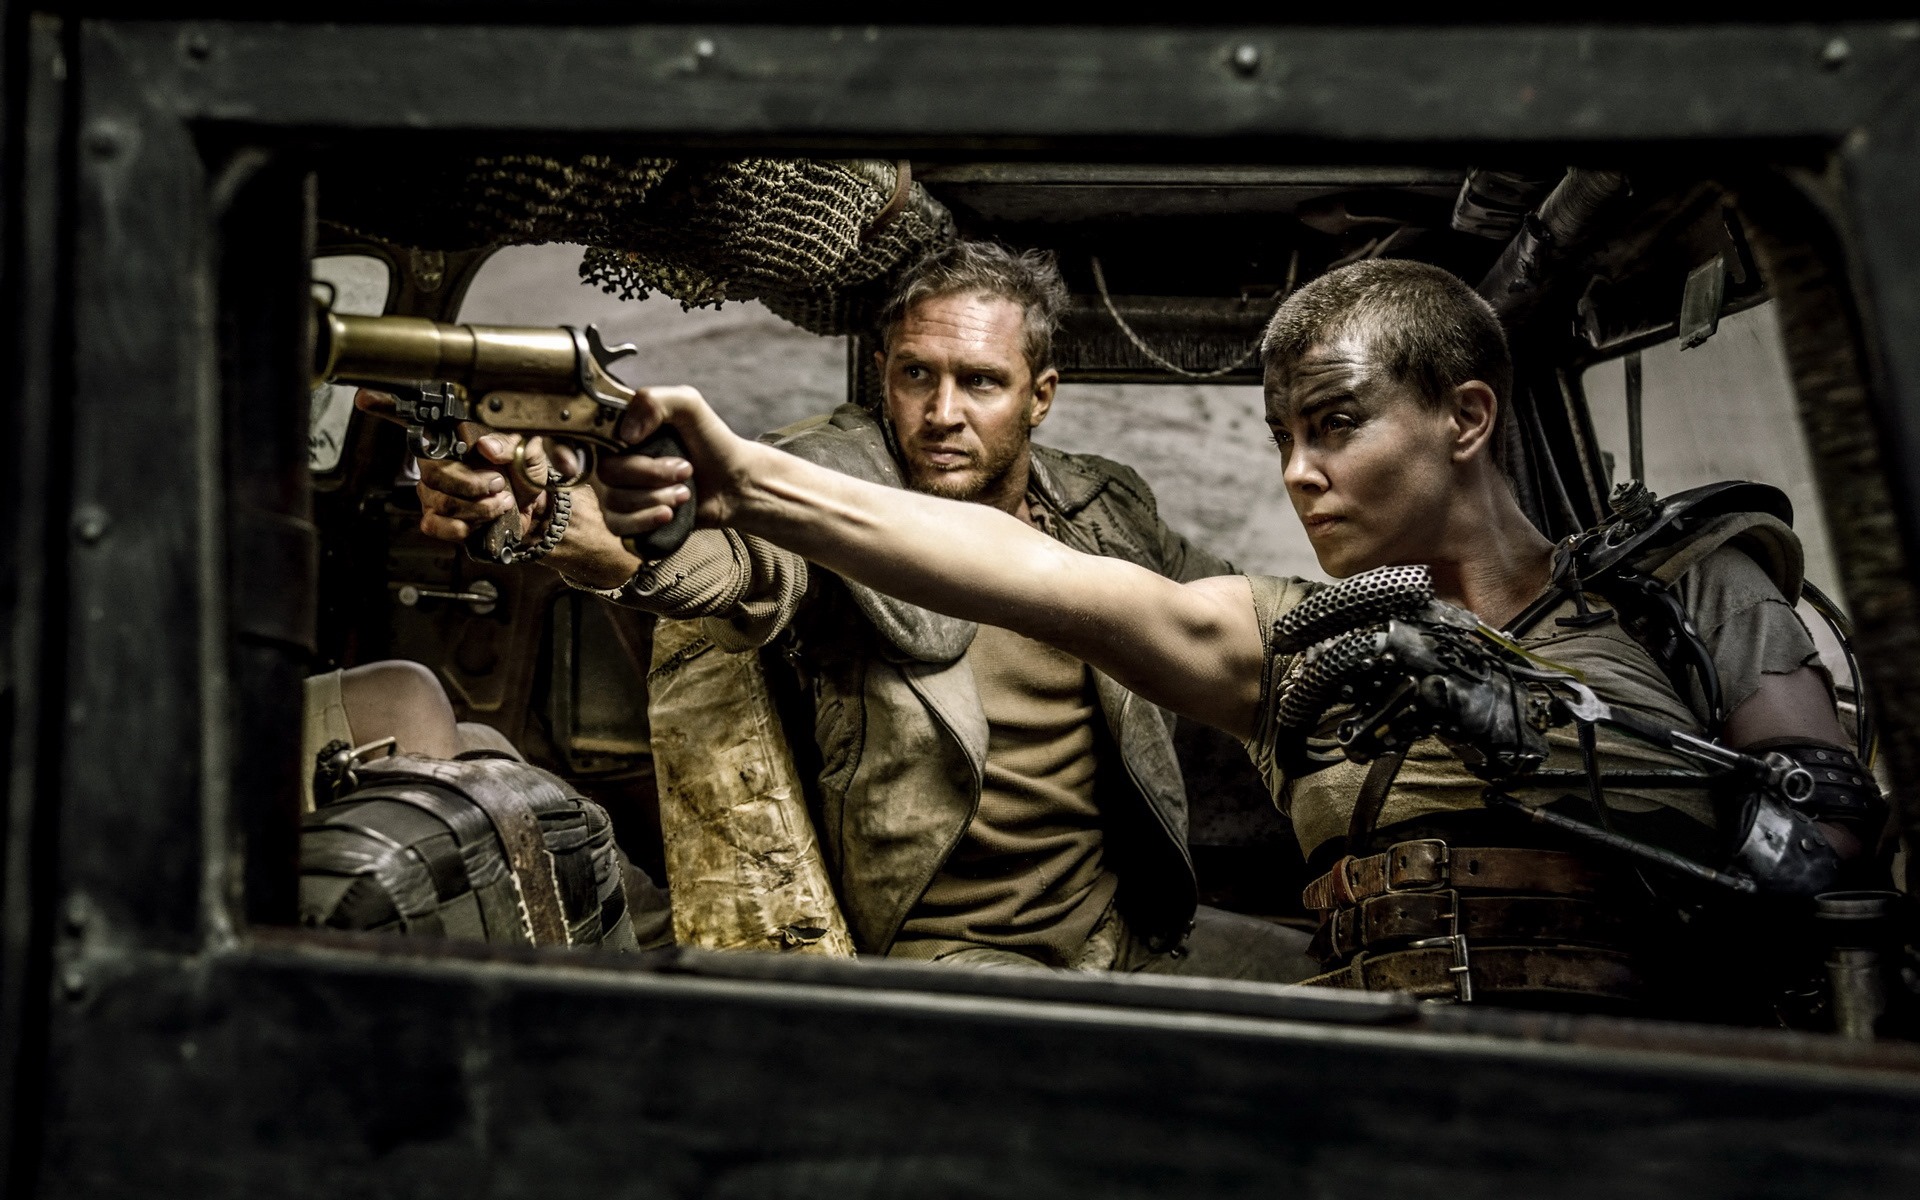 Mad Max: Fury Road, HD movie wallpapers #26 - 1920x1200